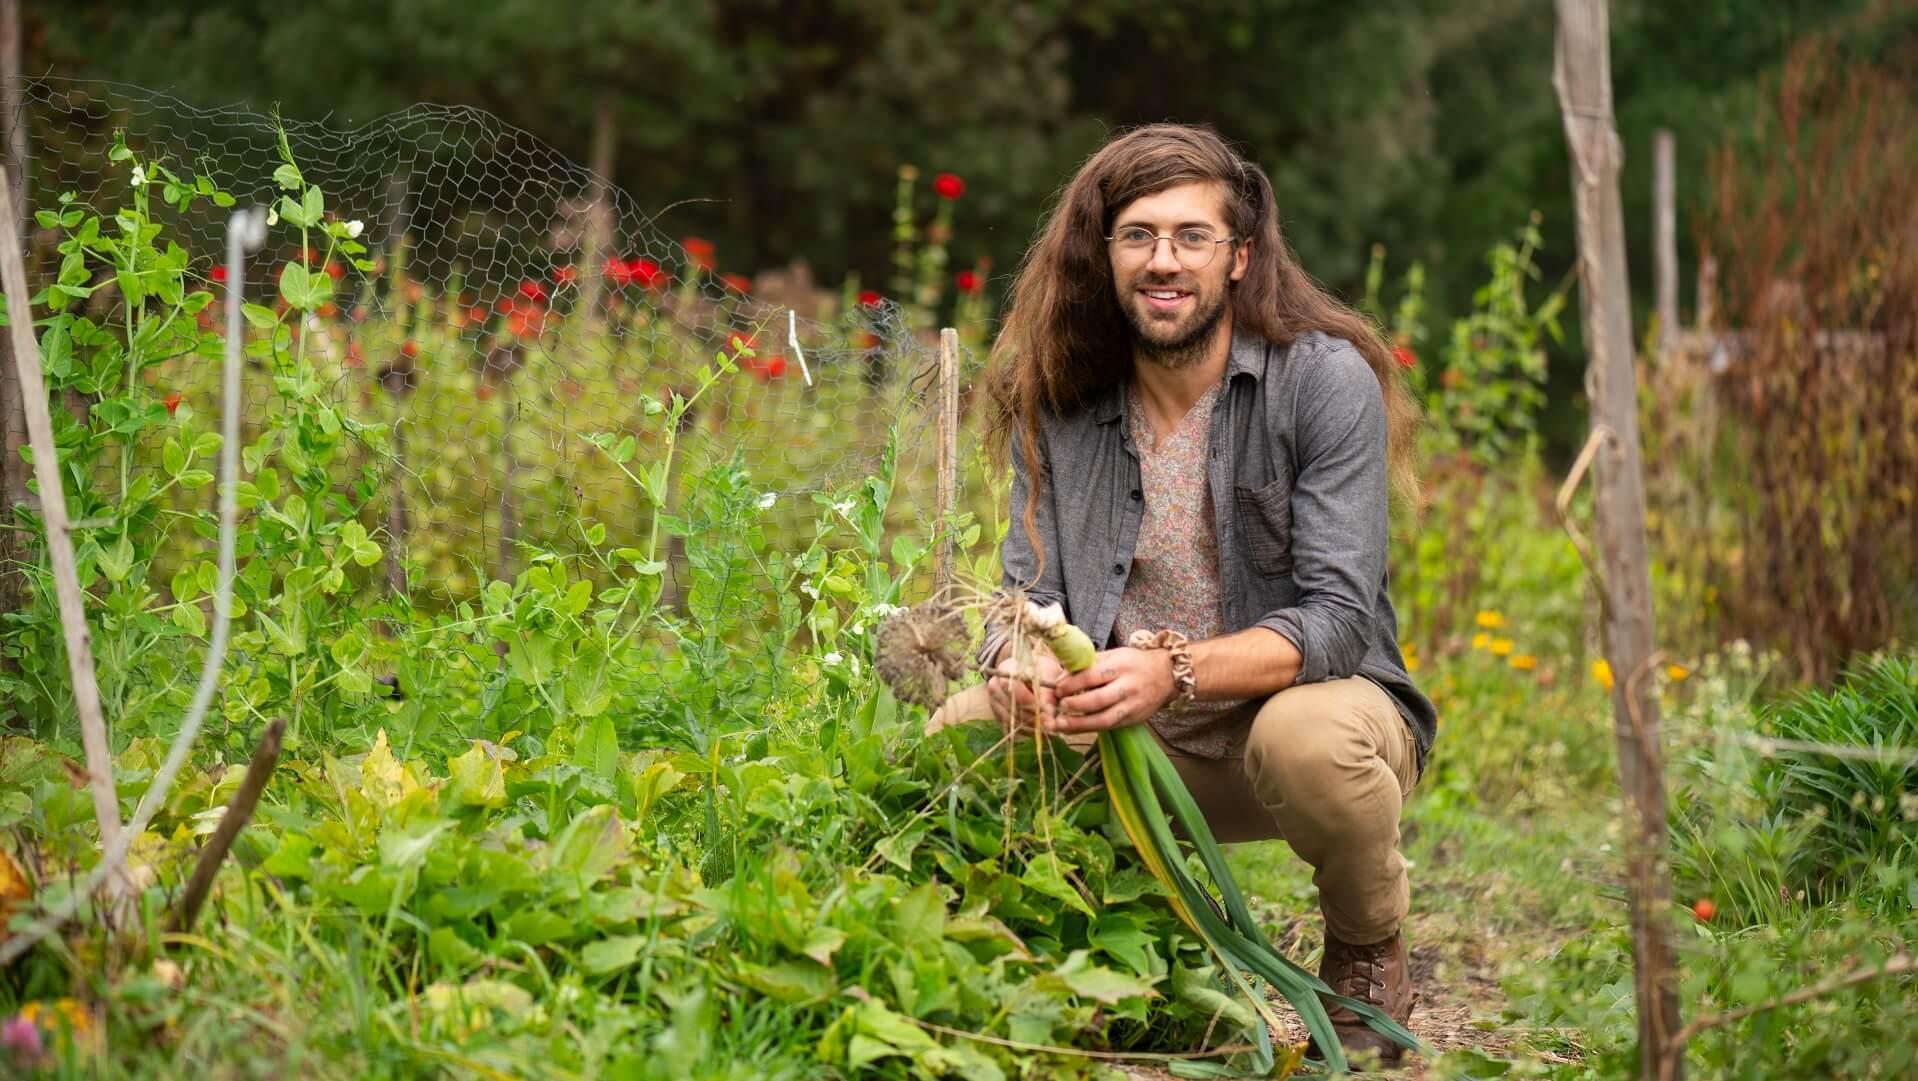 Former PhD student Sam Bliss crouching in a garden holding an onion